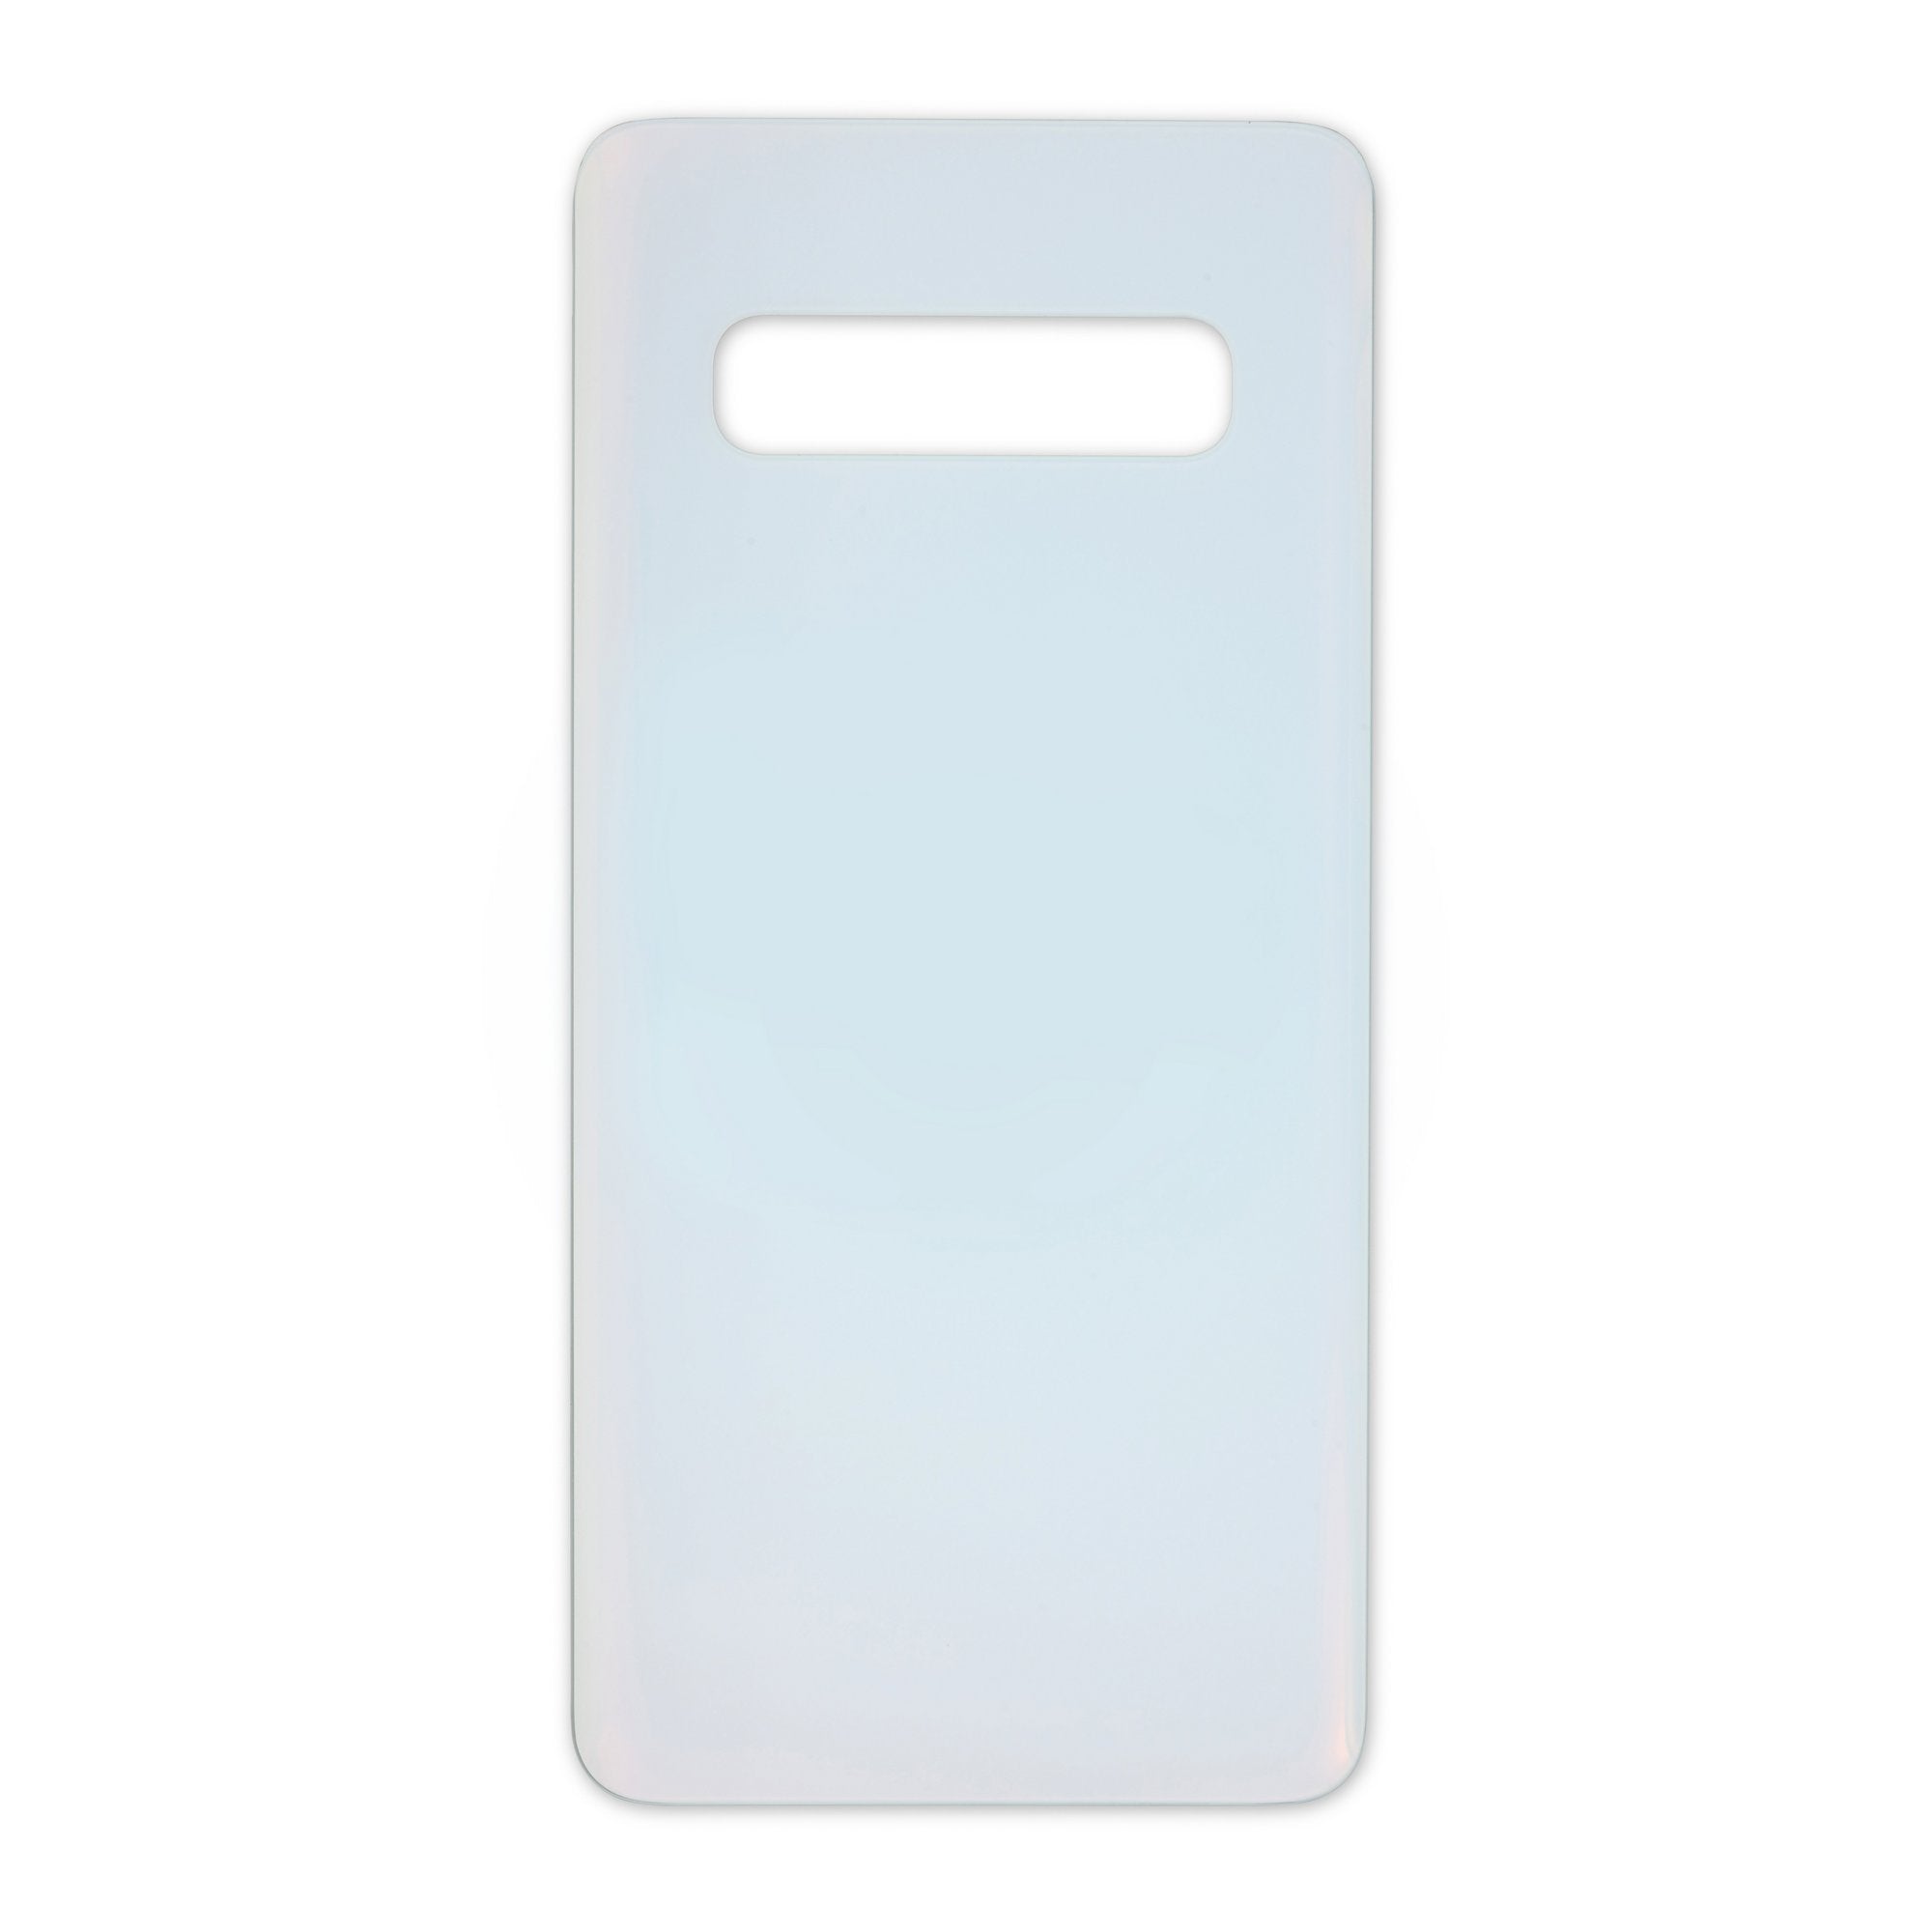 Galaxy S10 Rear Glass Panel/Cover White New